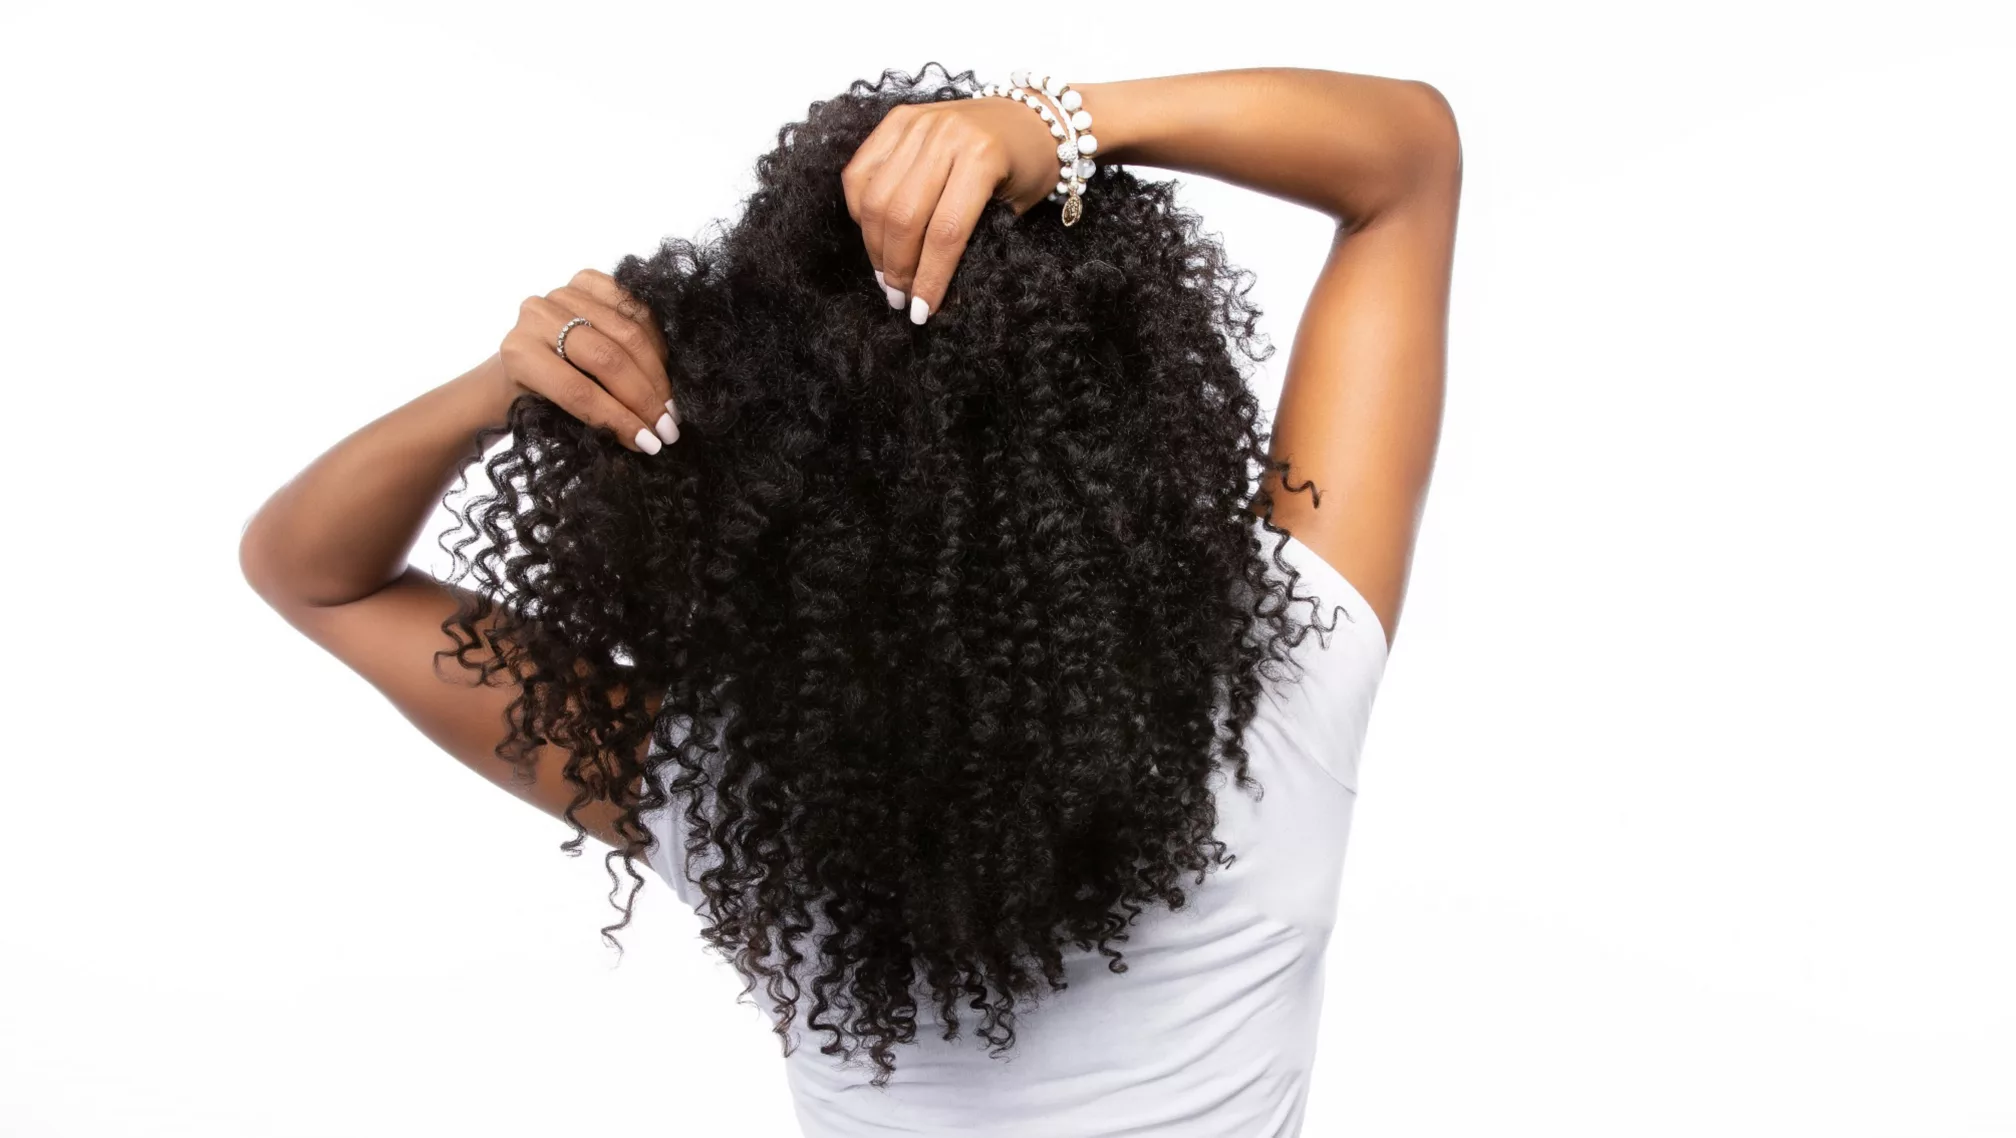 Personal care for textured hair